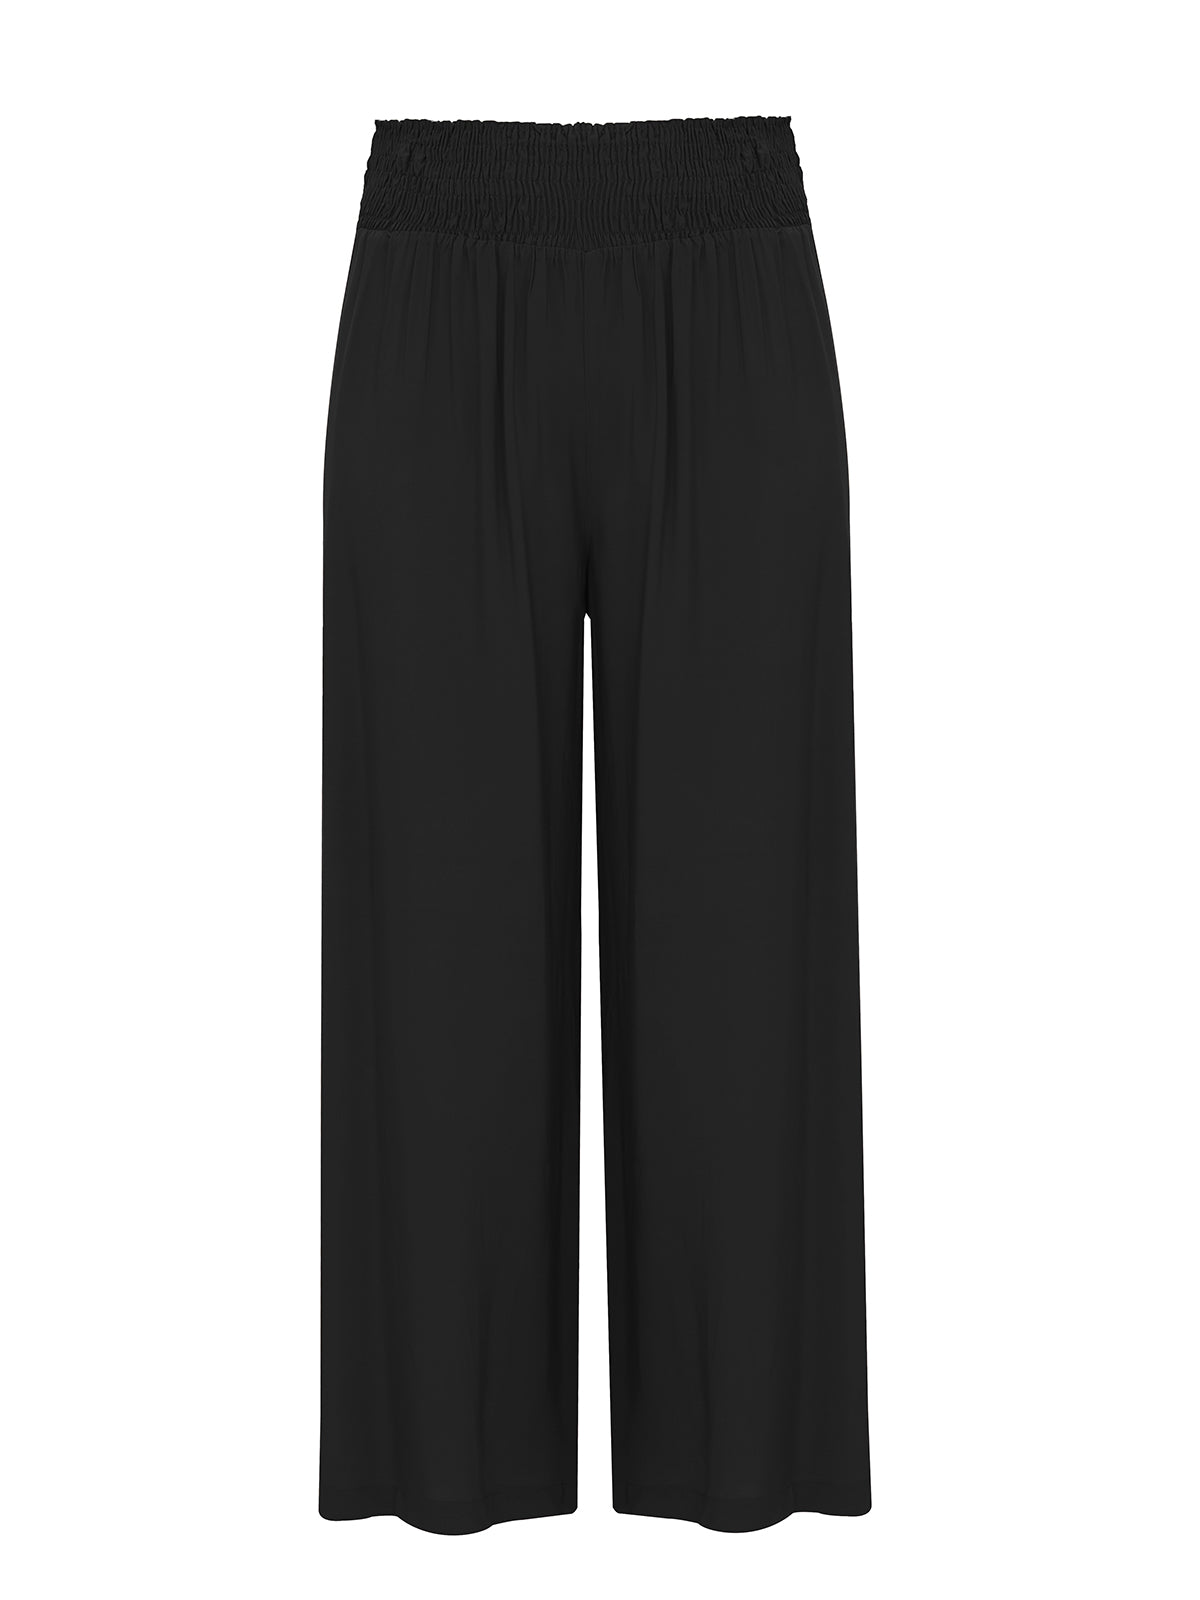 Mat Smock Waisted Trousers in Black - Wardrobe Plus